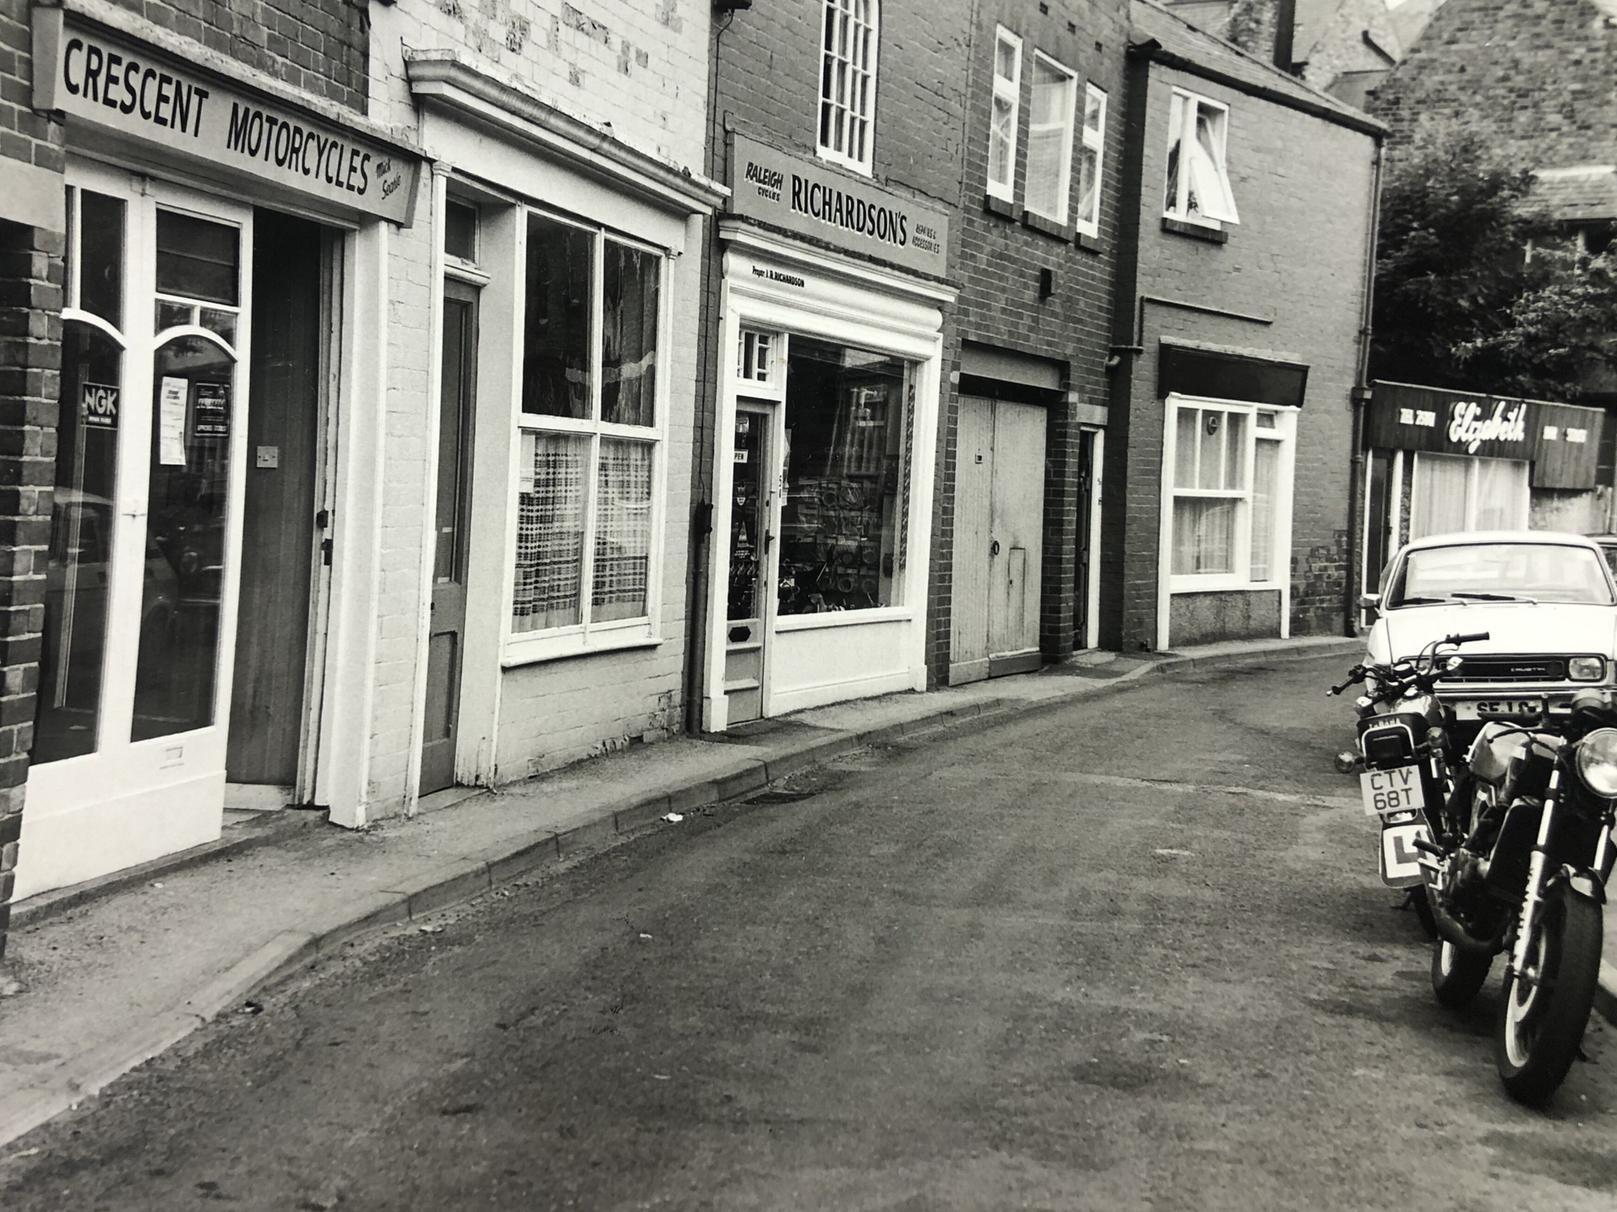 Tucked away in the little road off Ramshill there were these shops in 1982. Now largely a residential street, a motorcycle and bicycle shop used to be based there. Richardsons is still a business in the town.